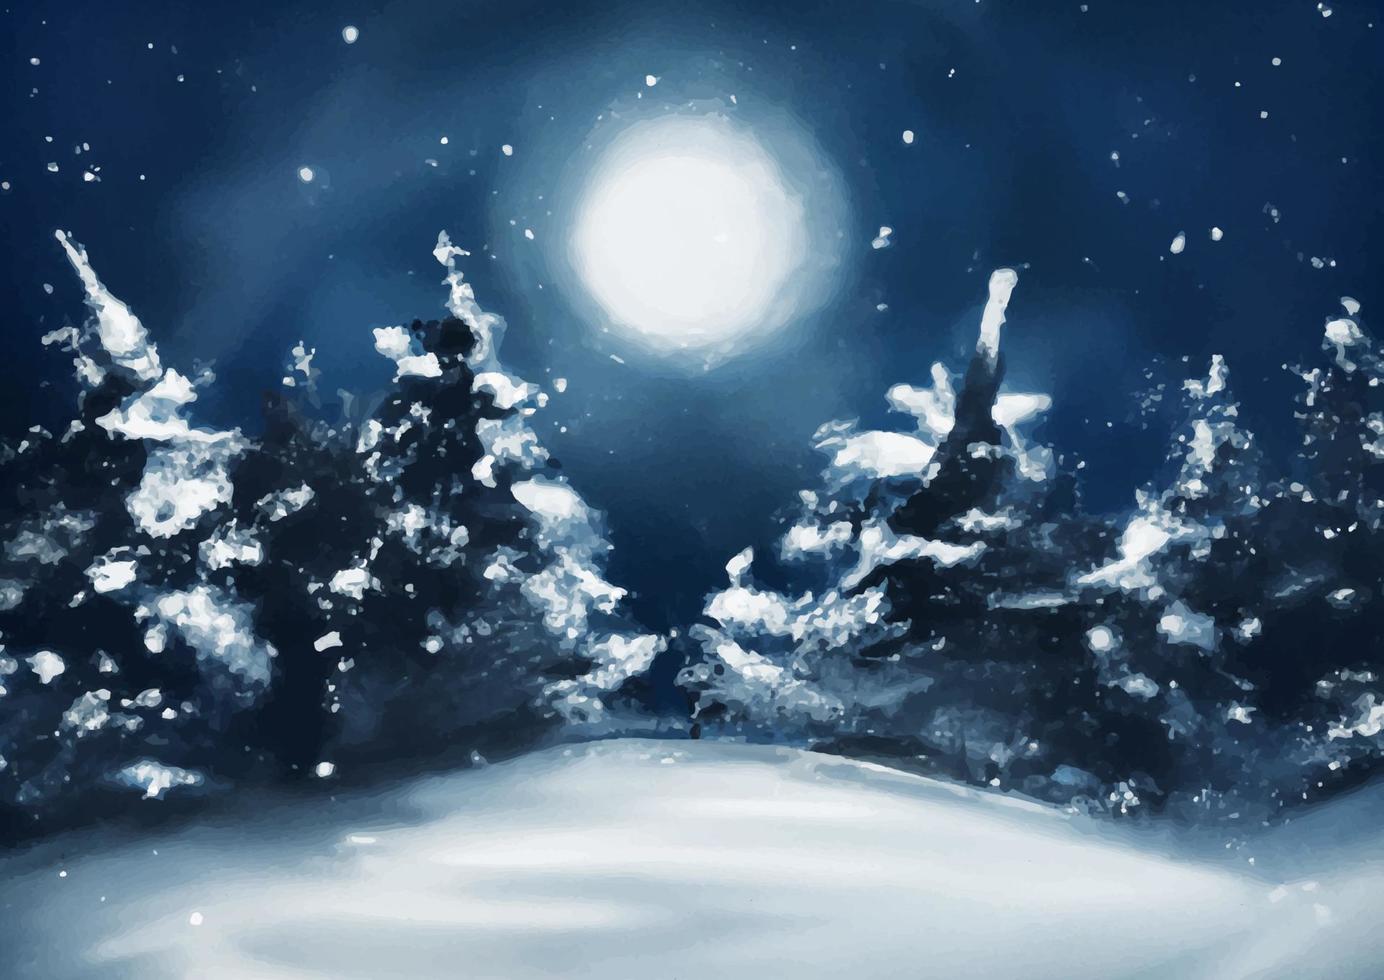 hand painted watercolour winter landscape at night vector